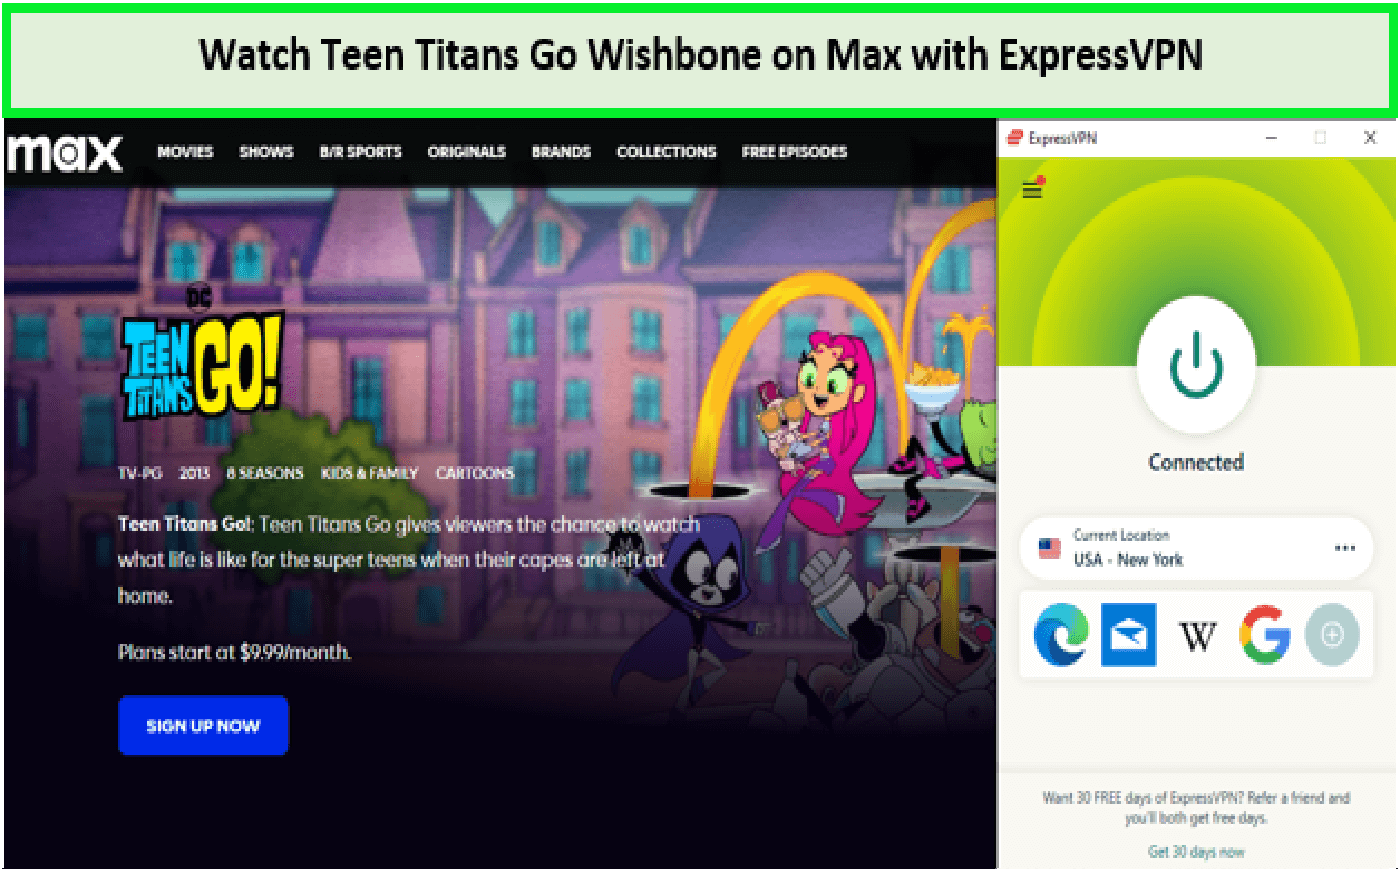 Watch-Teen-Titans-Go-Wishbone-outside-US-on-Max-with-ExpressVPN